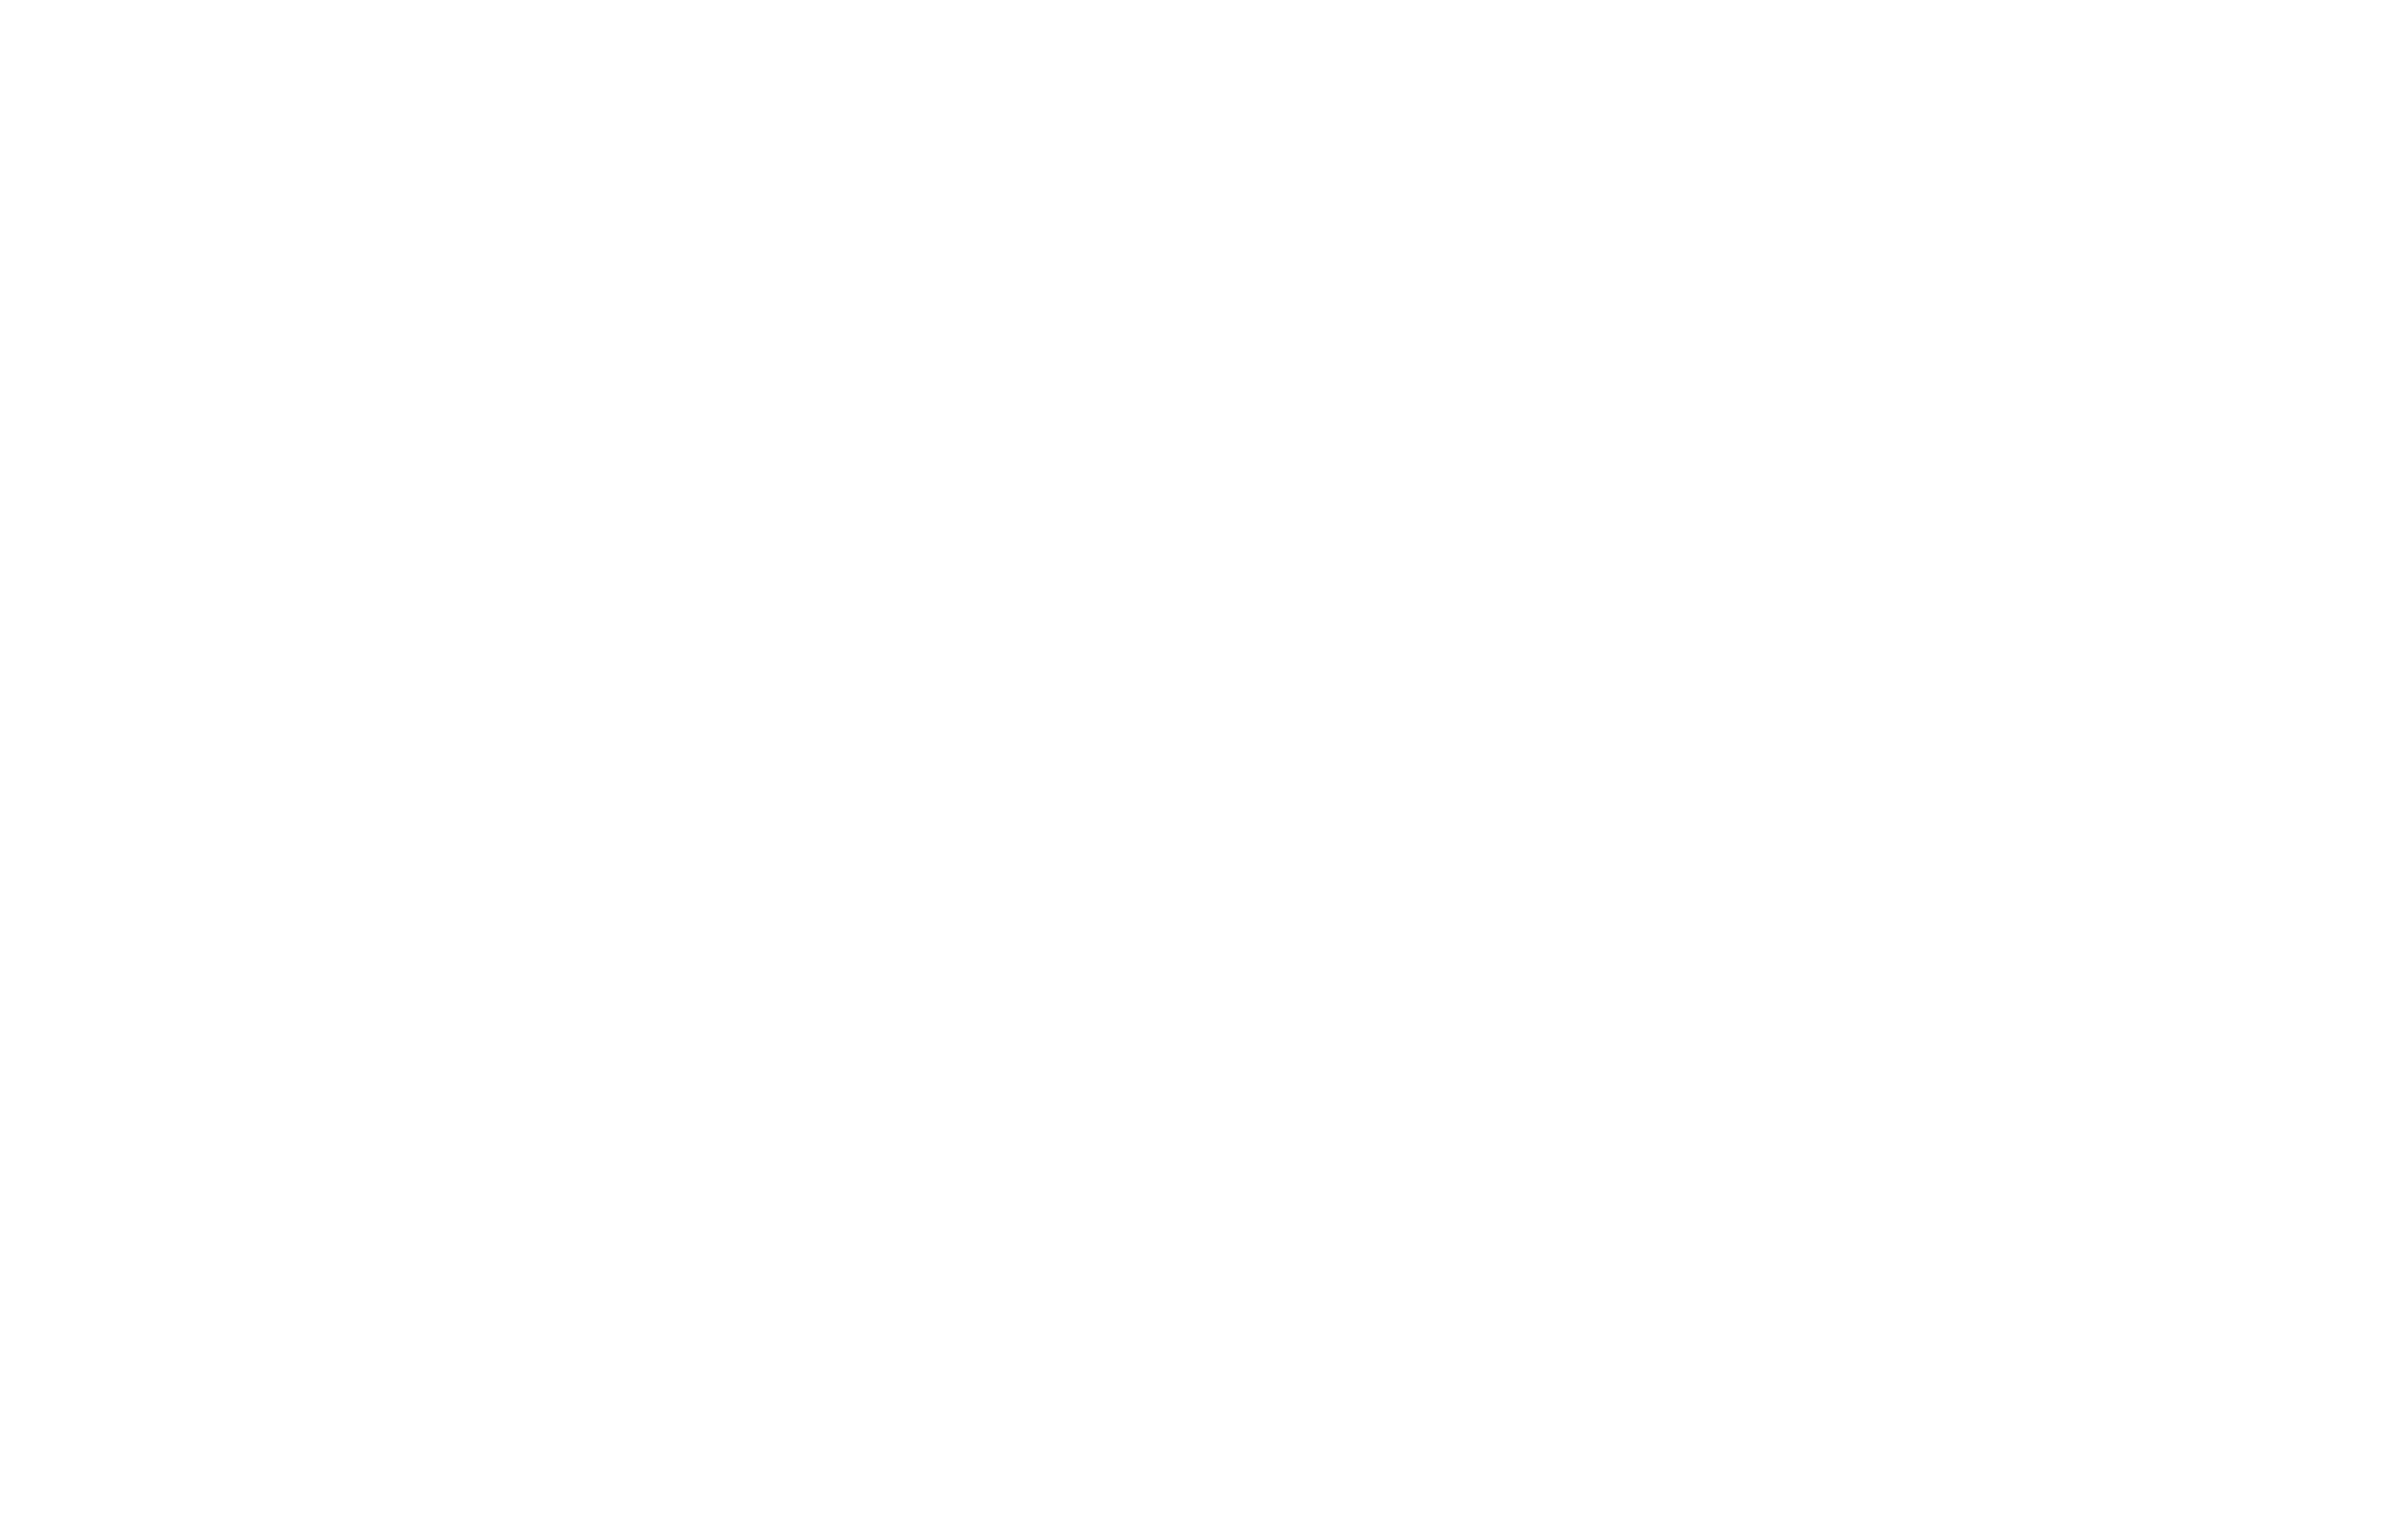 Cannondale Electric Bikes | More rides. More speed. More distance. More fun.